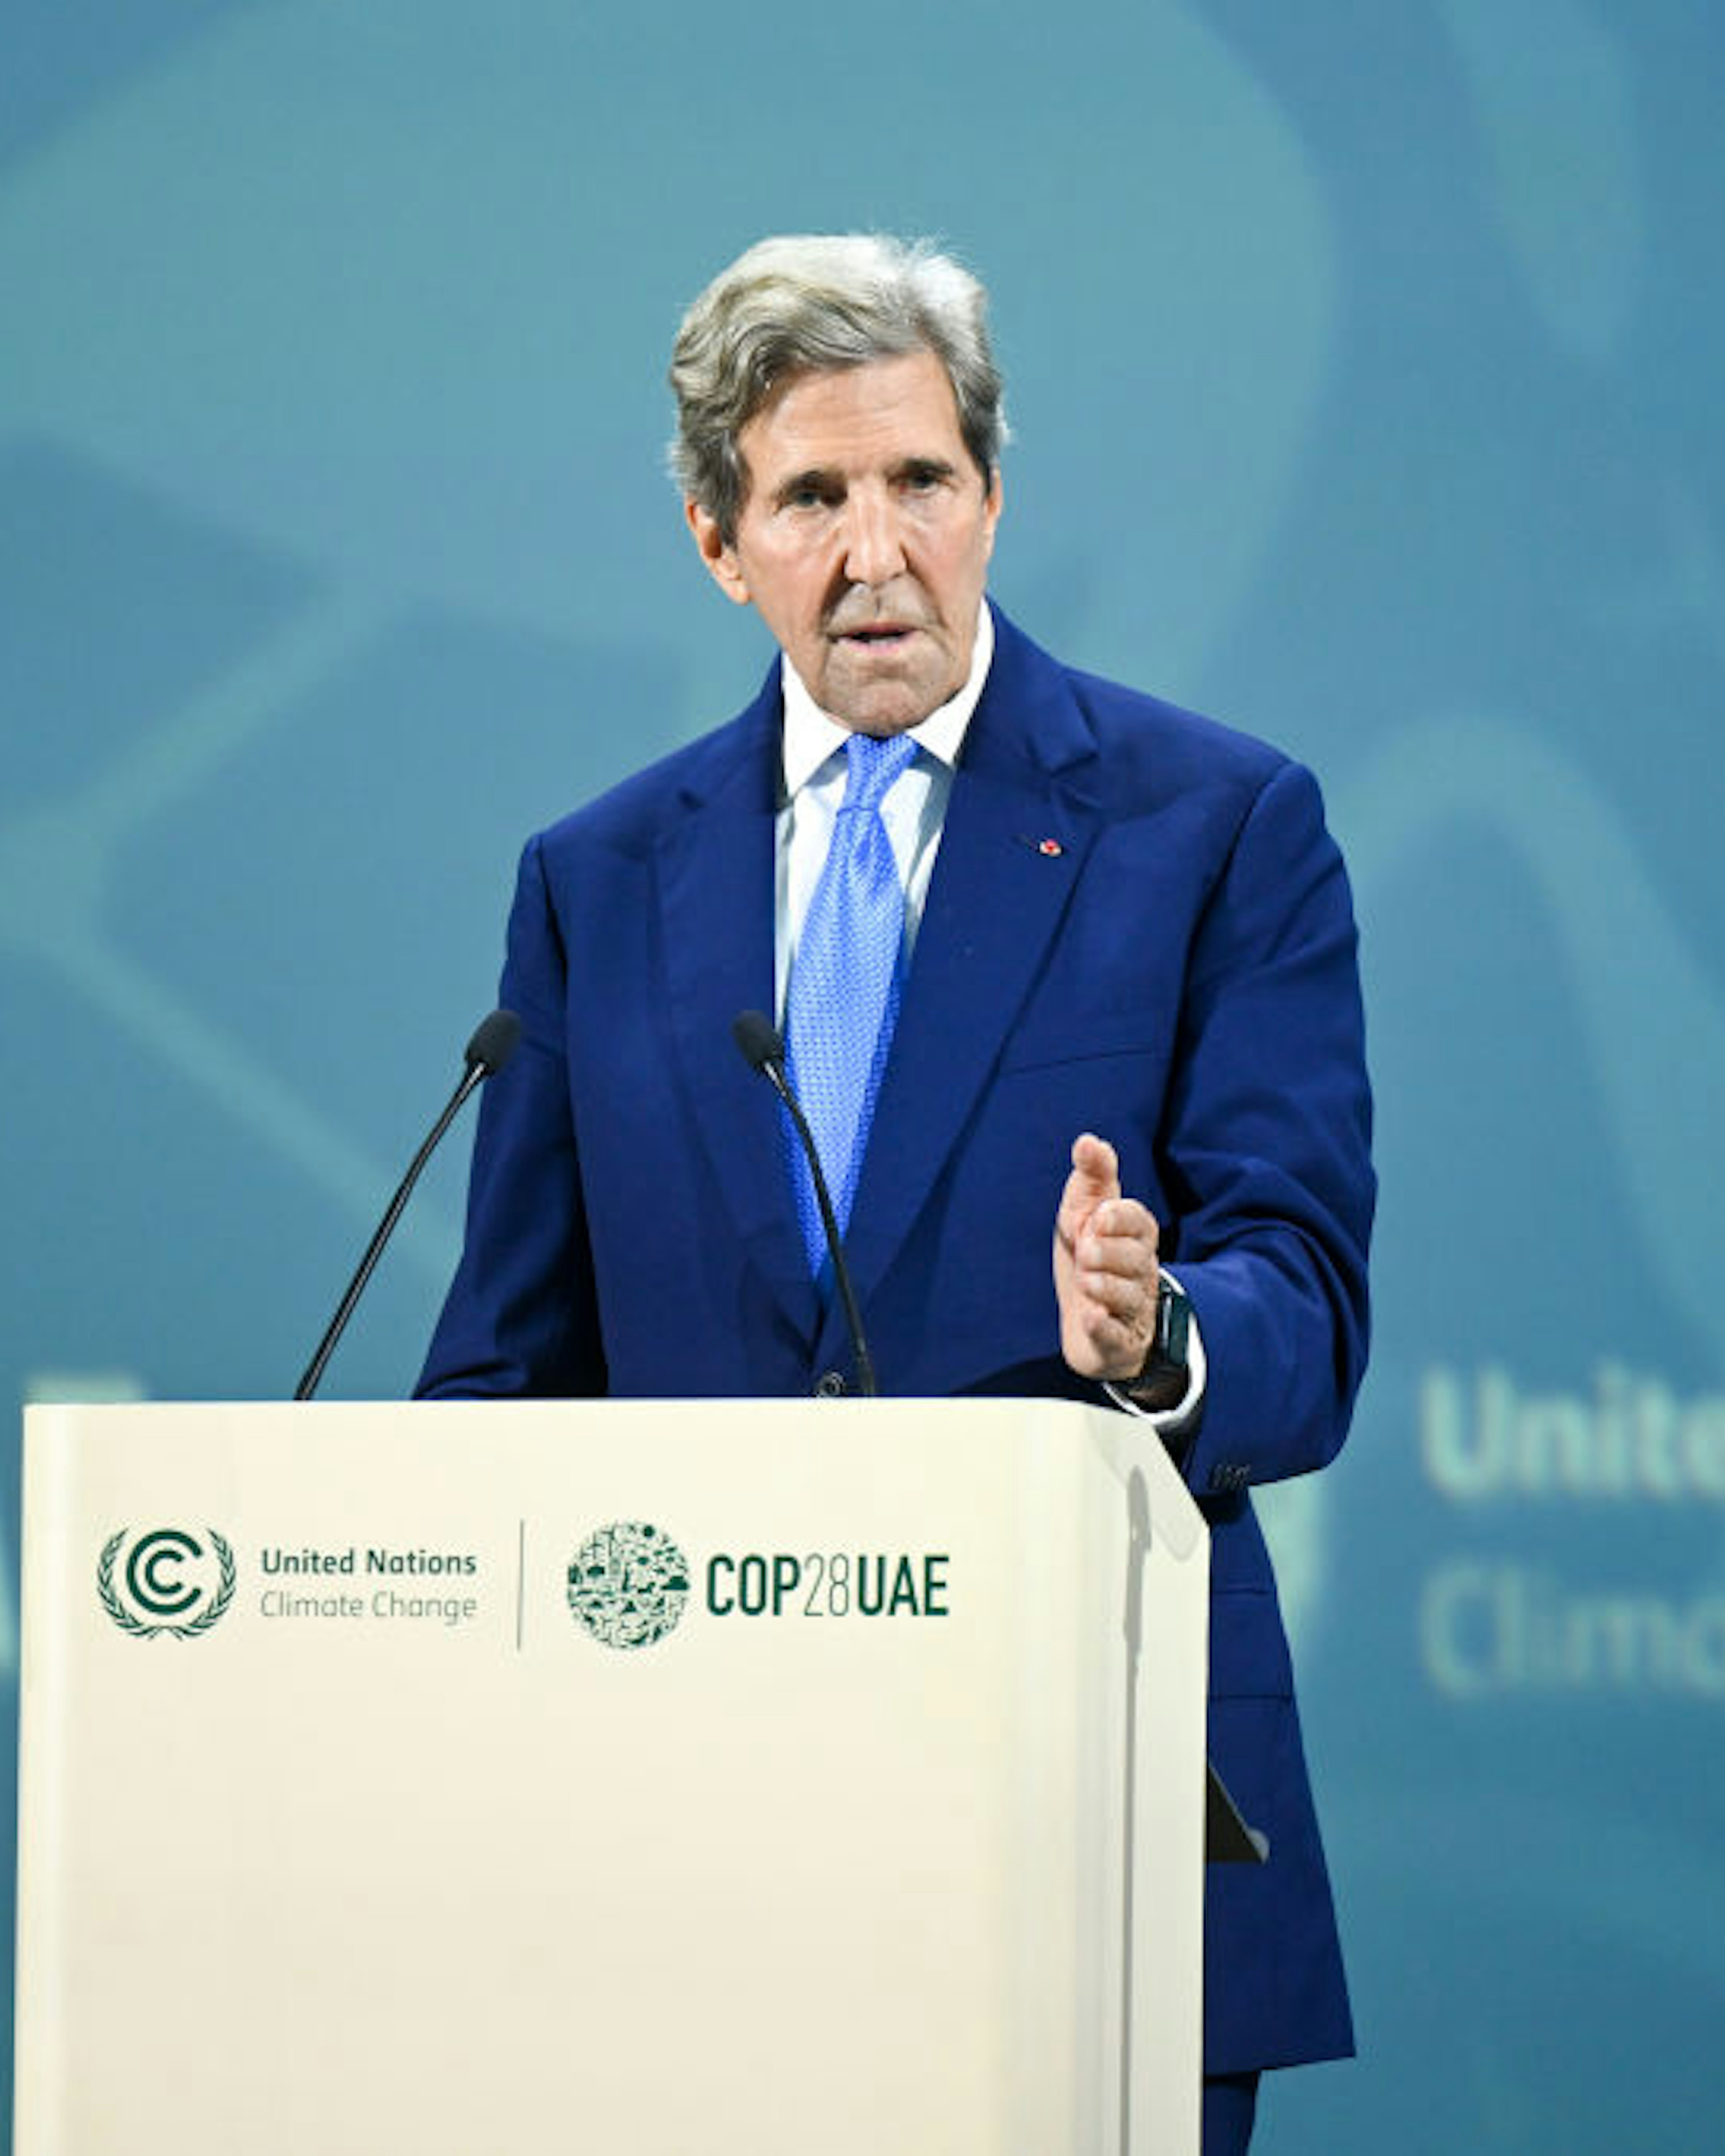 DUBAI, UNITED ARAB EMIRATES - DECEMBER 2: In this handout image supplied by COP28, John Kerry, US special presidential envoy for climate speaks during the Energy Session at Al Waha Theater during day two of the high-level segment of the UNFCCC COP28 Climate Conference at Expo City Dubai on December 2, 2023 in Dubai, United Arab Emirates. The COP28, which is running from November 30 through December 12, brings together stakeholders, including international heads of state and other leaders, scientists, environmentalists, indigenous peoples representatives, activists and others to discuss and agree on the implementation of global measures towards mitigating the effects of climate change. (Photo by Stuart Wilson / COP28 via Getty Images)